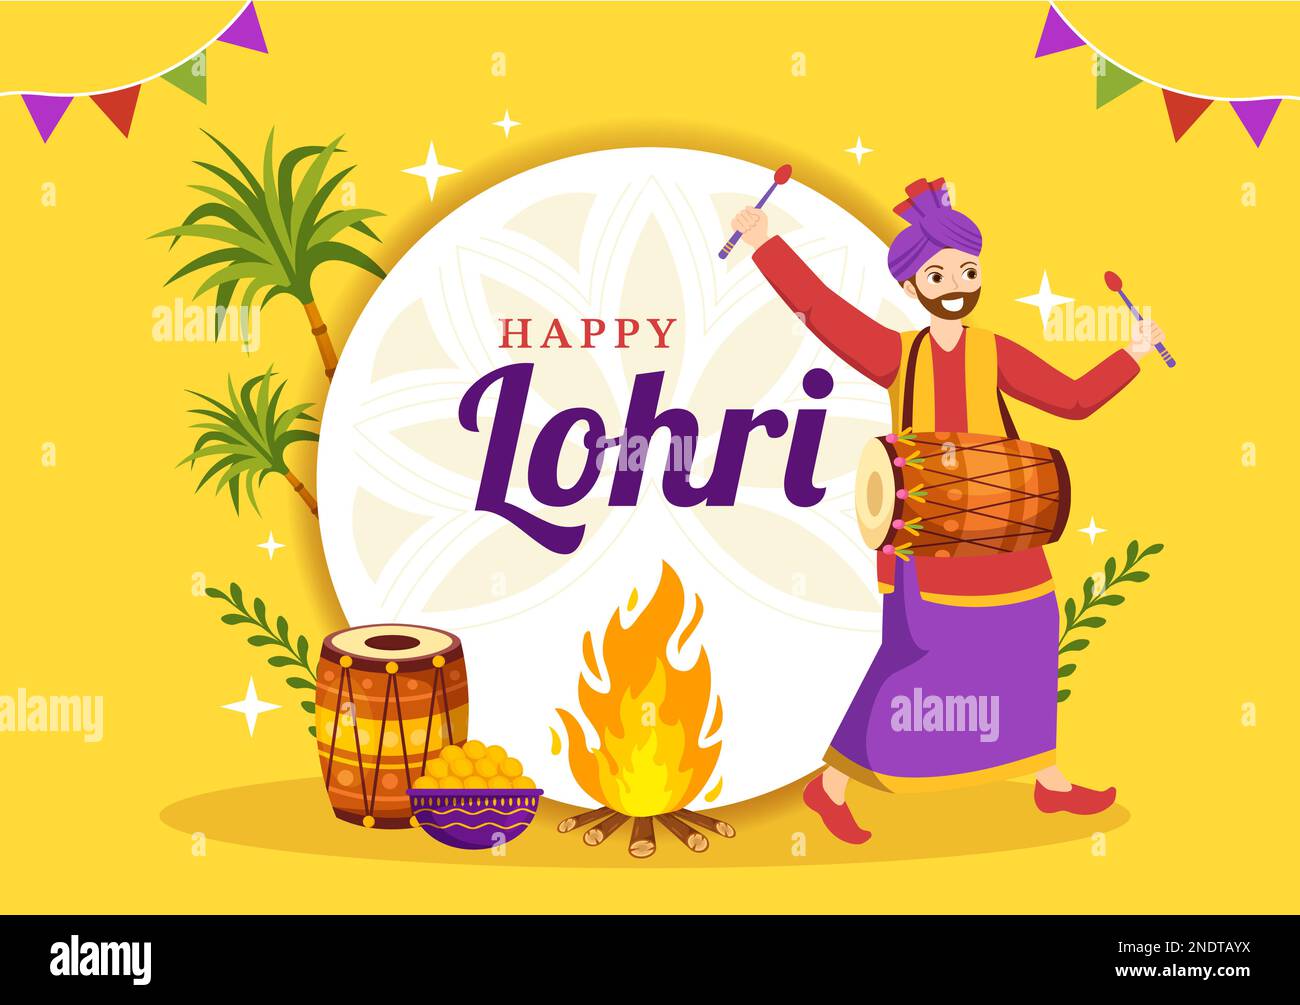 Lohri Stock Vector Images - Page 3 - Alamy